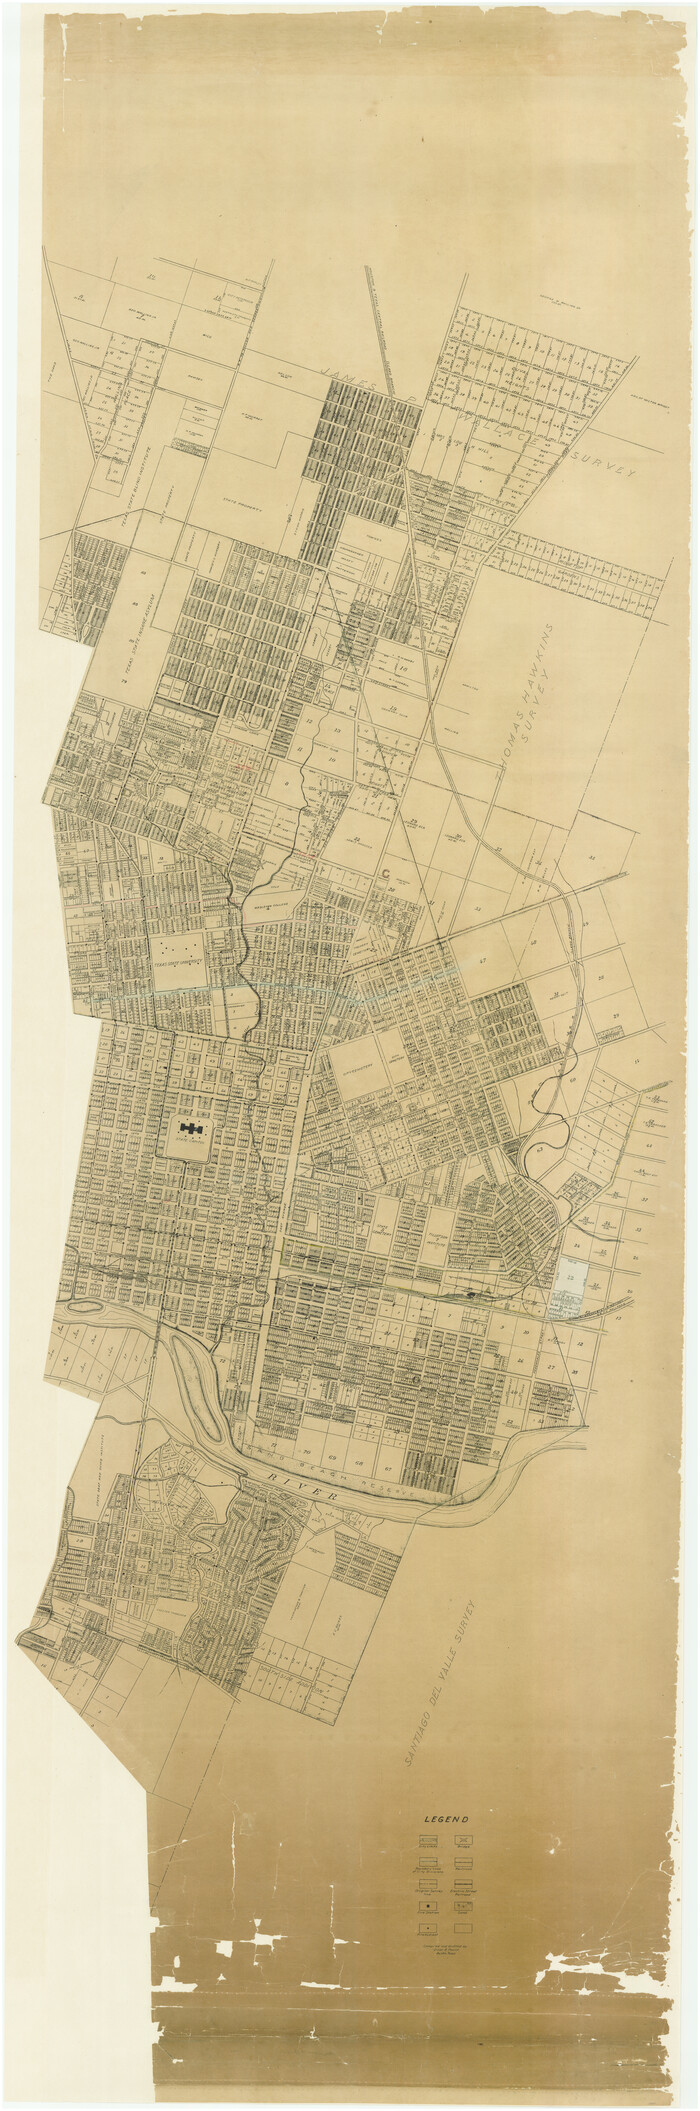 88863, The City of Austin and Suburbs, General Map Collection